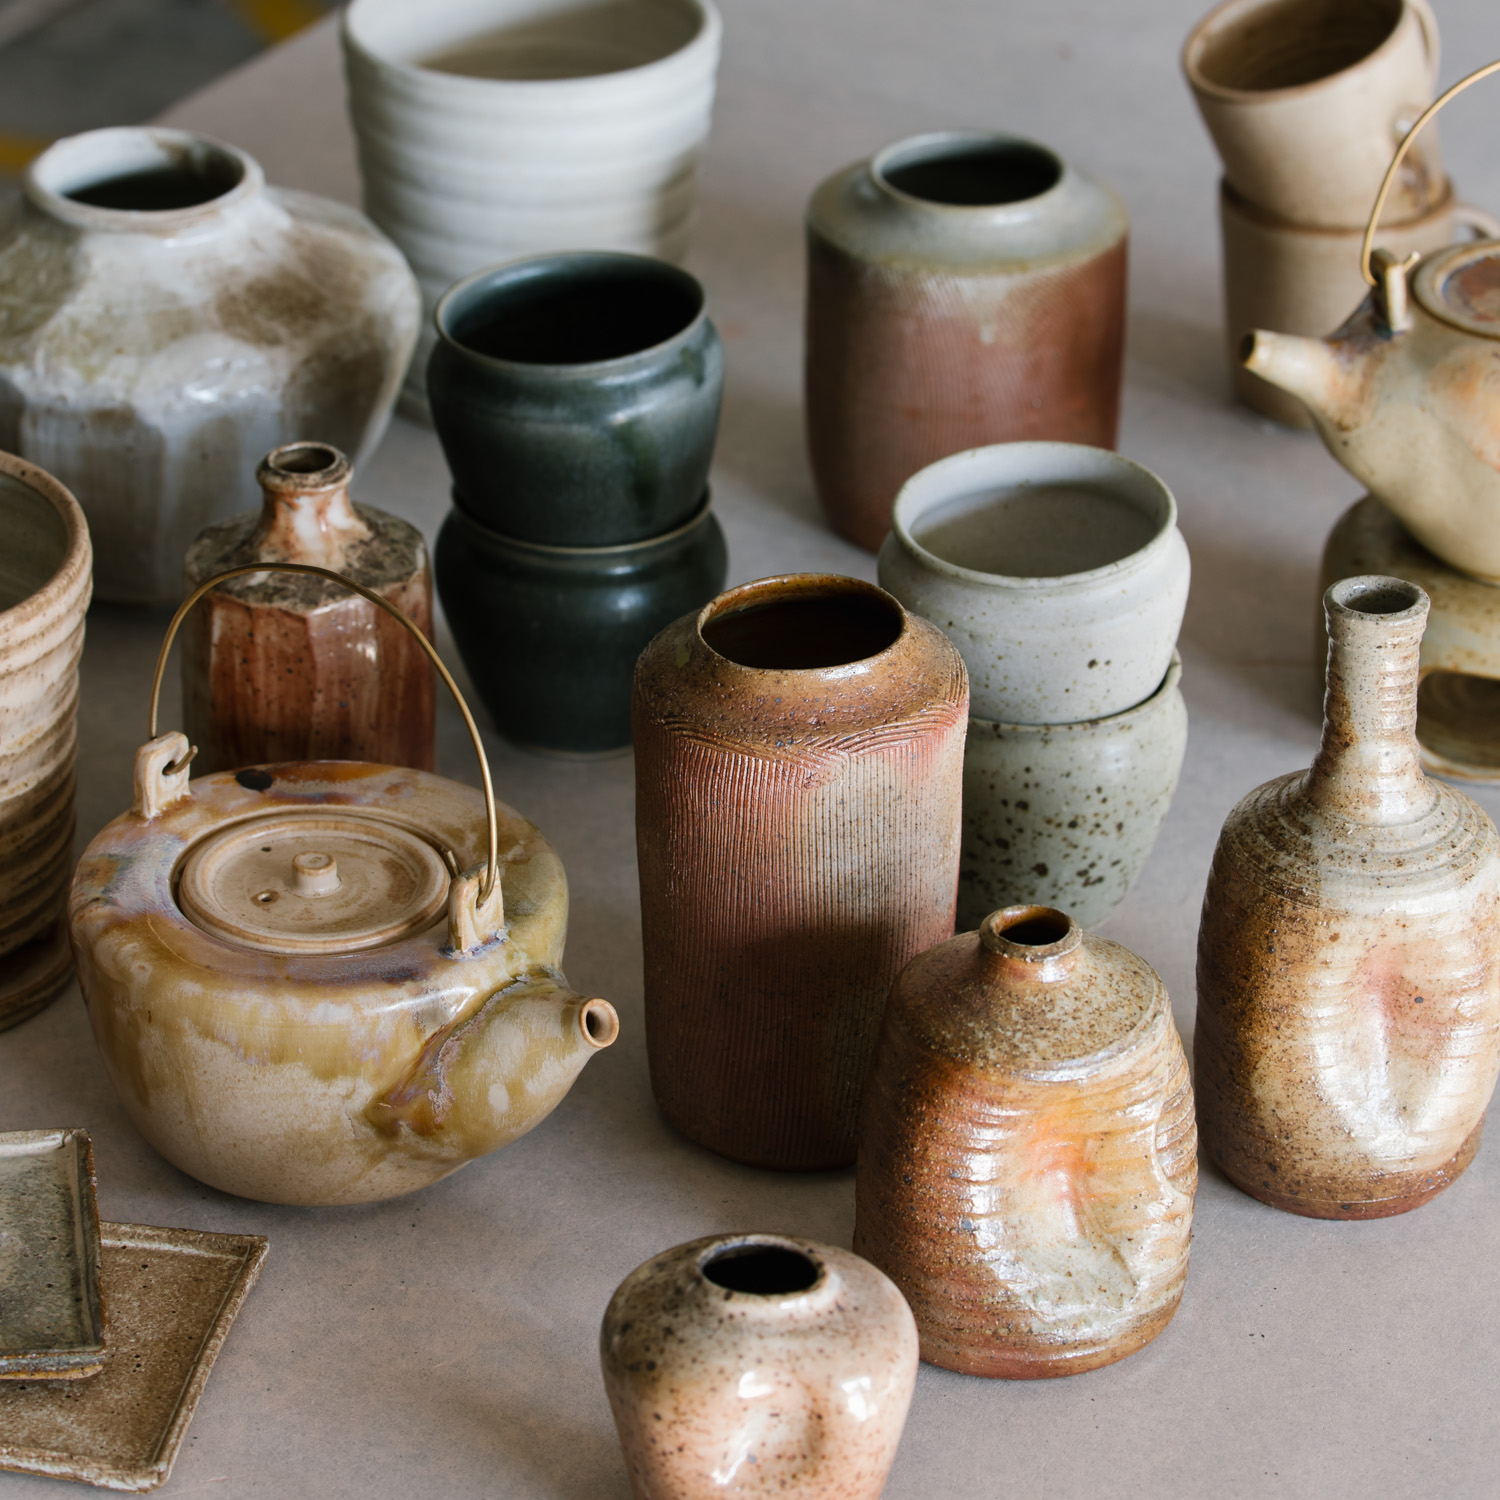 Selection of works by Emi Ceramics on a table together